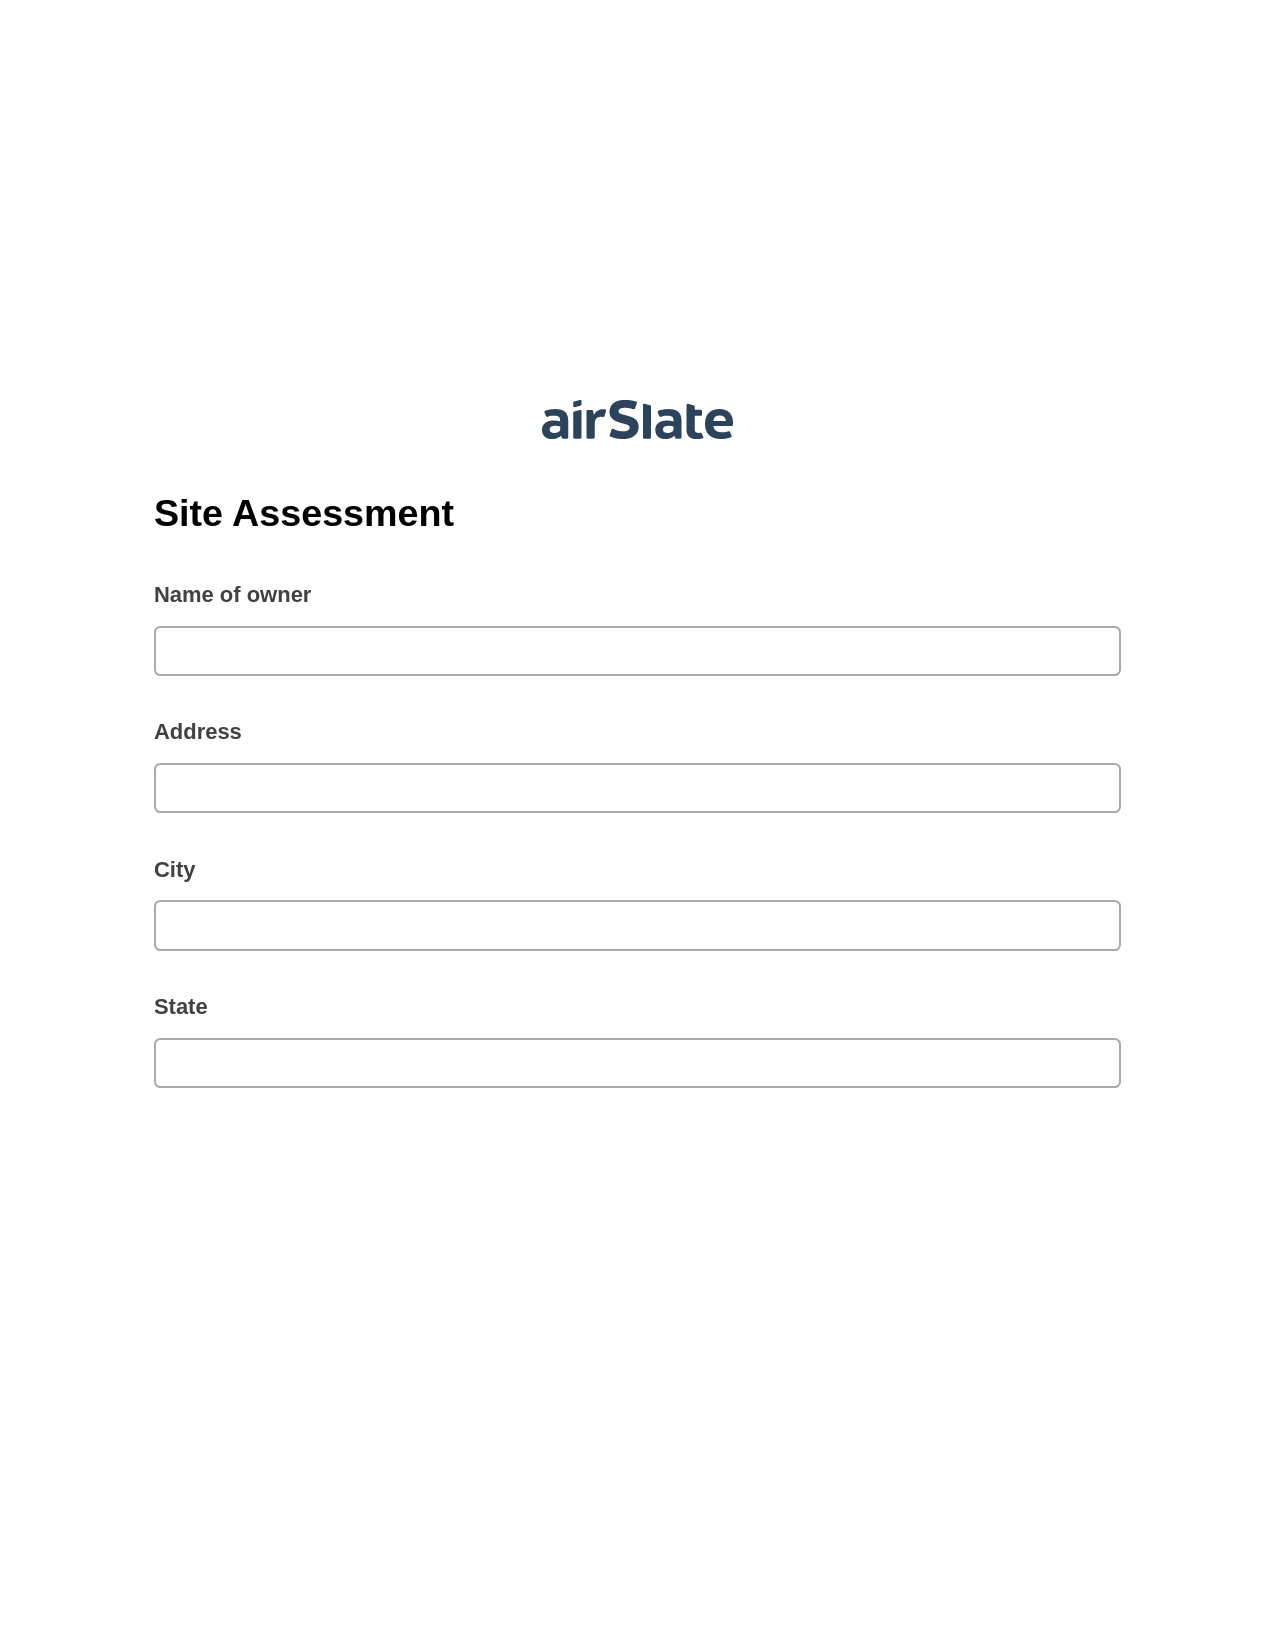 Site Assessment Pre-fill Dropdown from Airtable, Email Notification Bot, Slack Two-Way Binding Bot